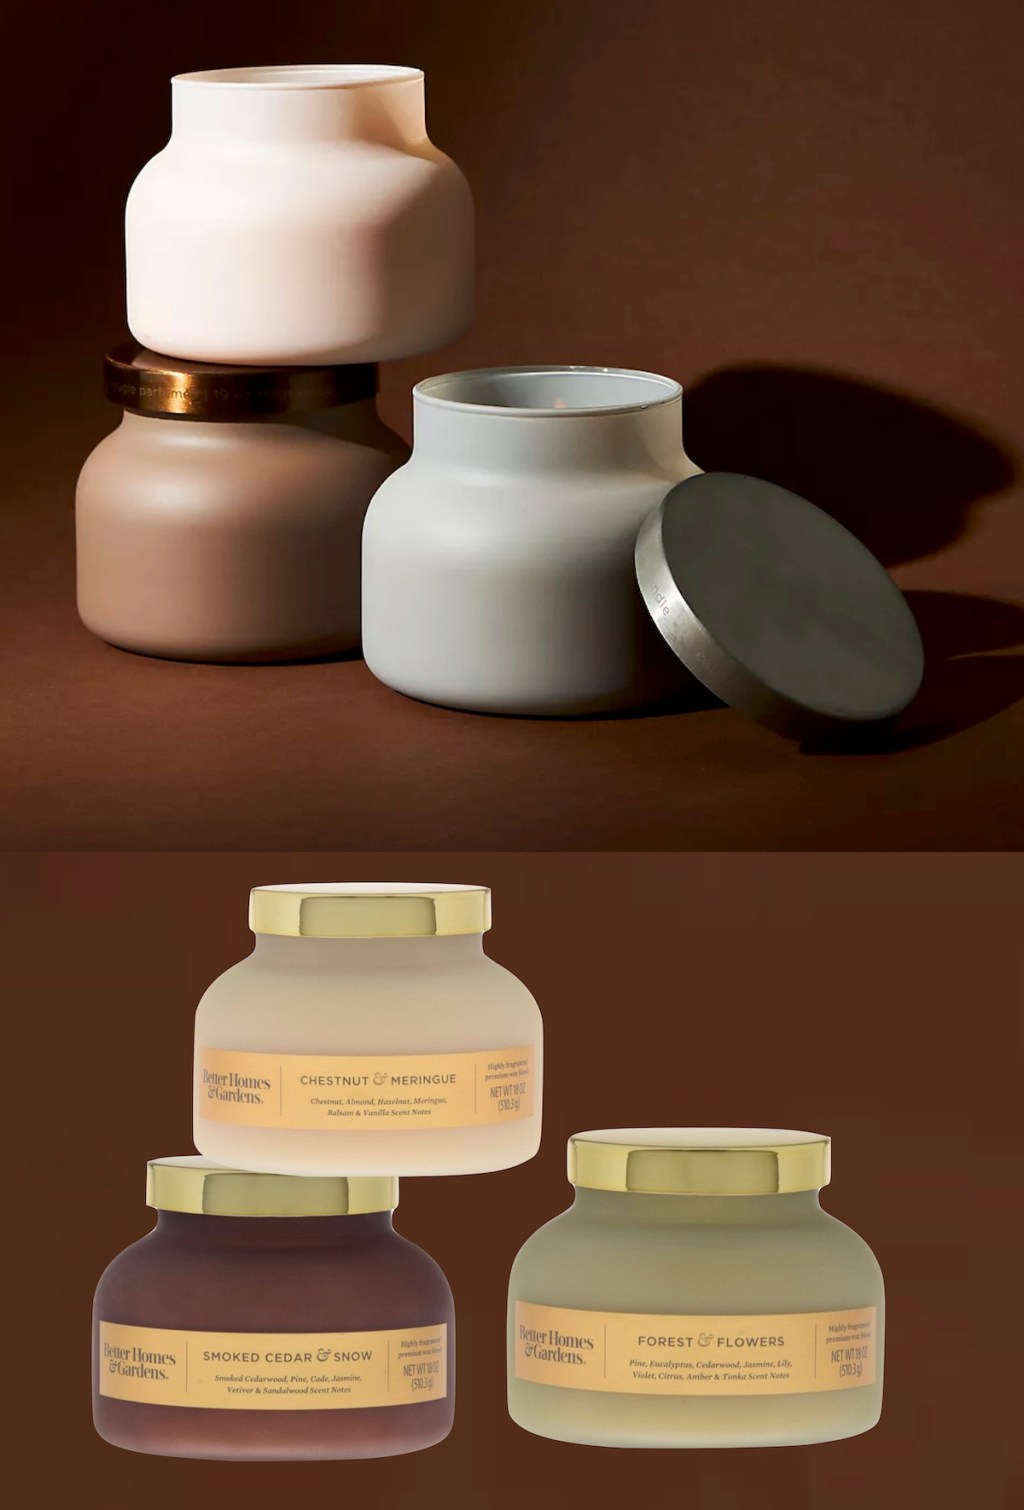 matte jar candles brown cream and gray with brown background - anthropologie knockoffs